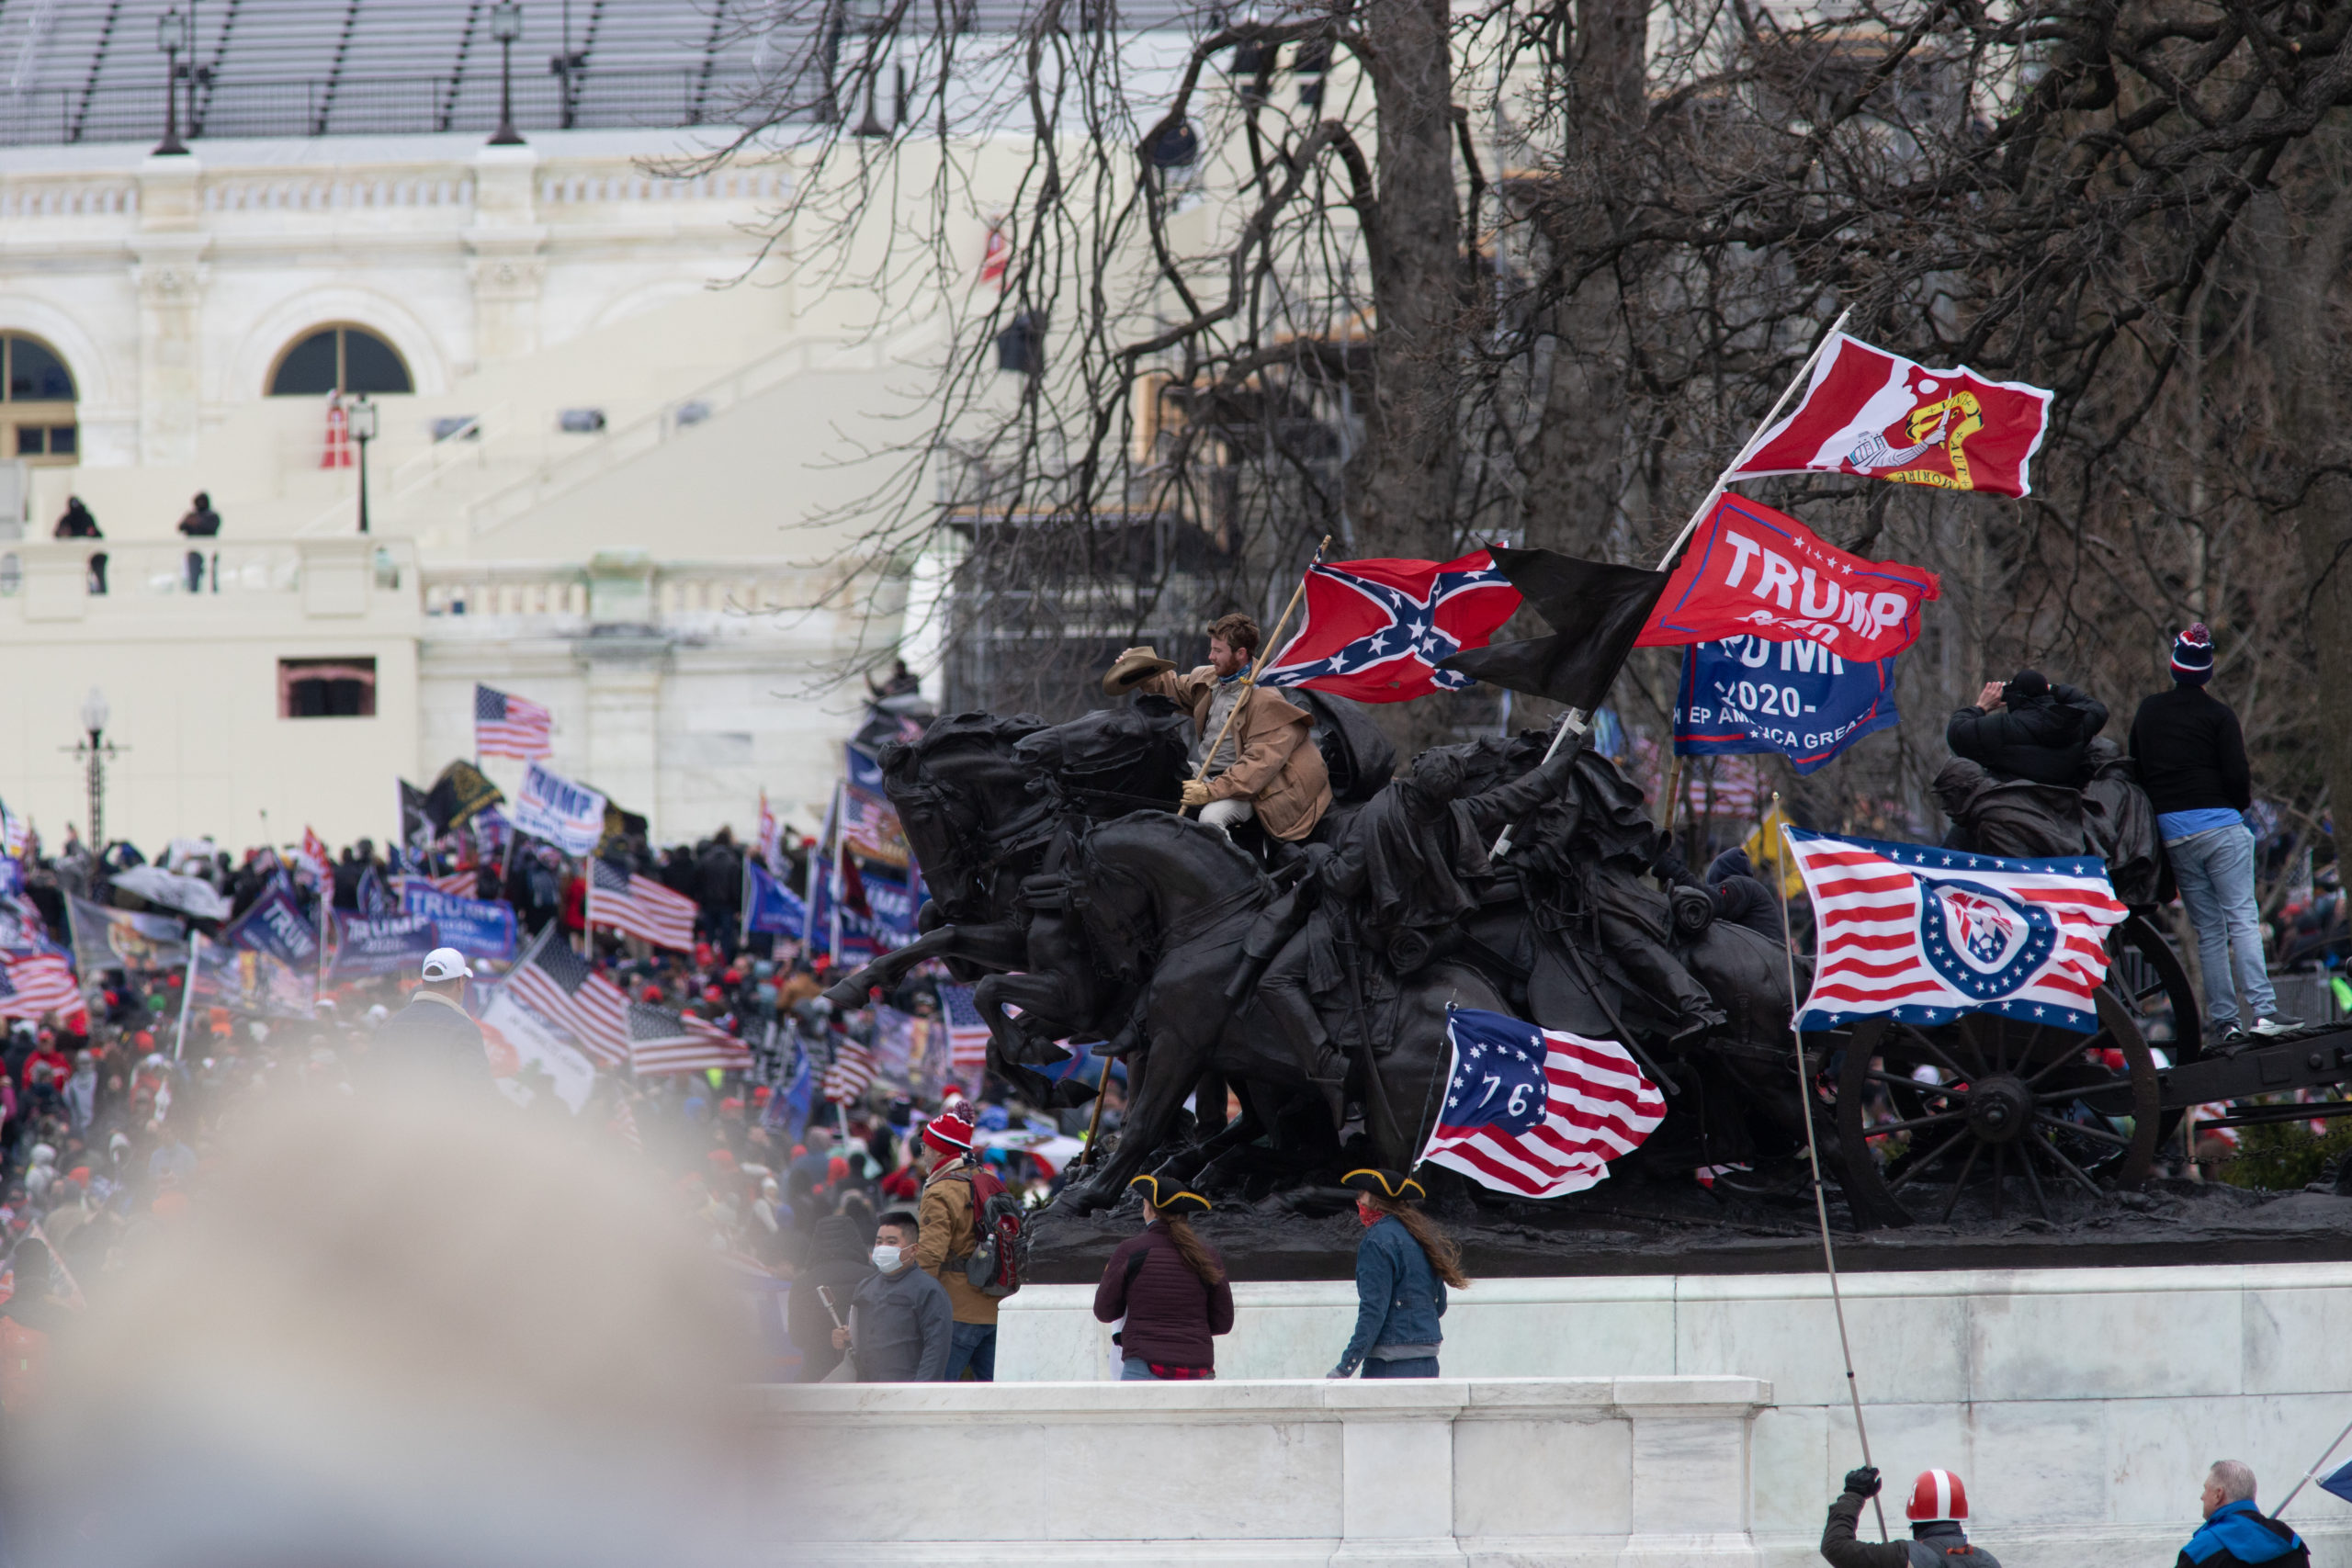 A man mounted a horse statue in front of the U.S. Capitol while holding a Confederate flag in Washington, D.C. on Jan. 6, 2021. (Kaylee Greenlee – Daily Caller News Foundation)